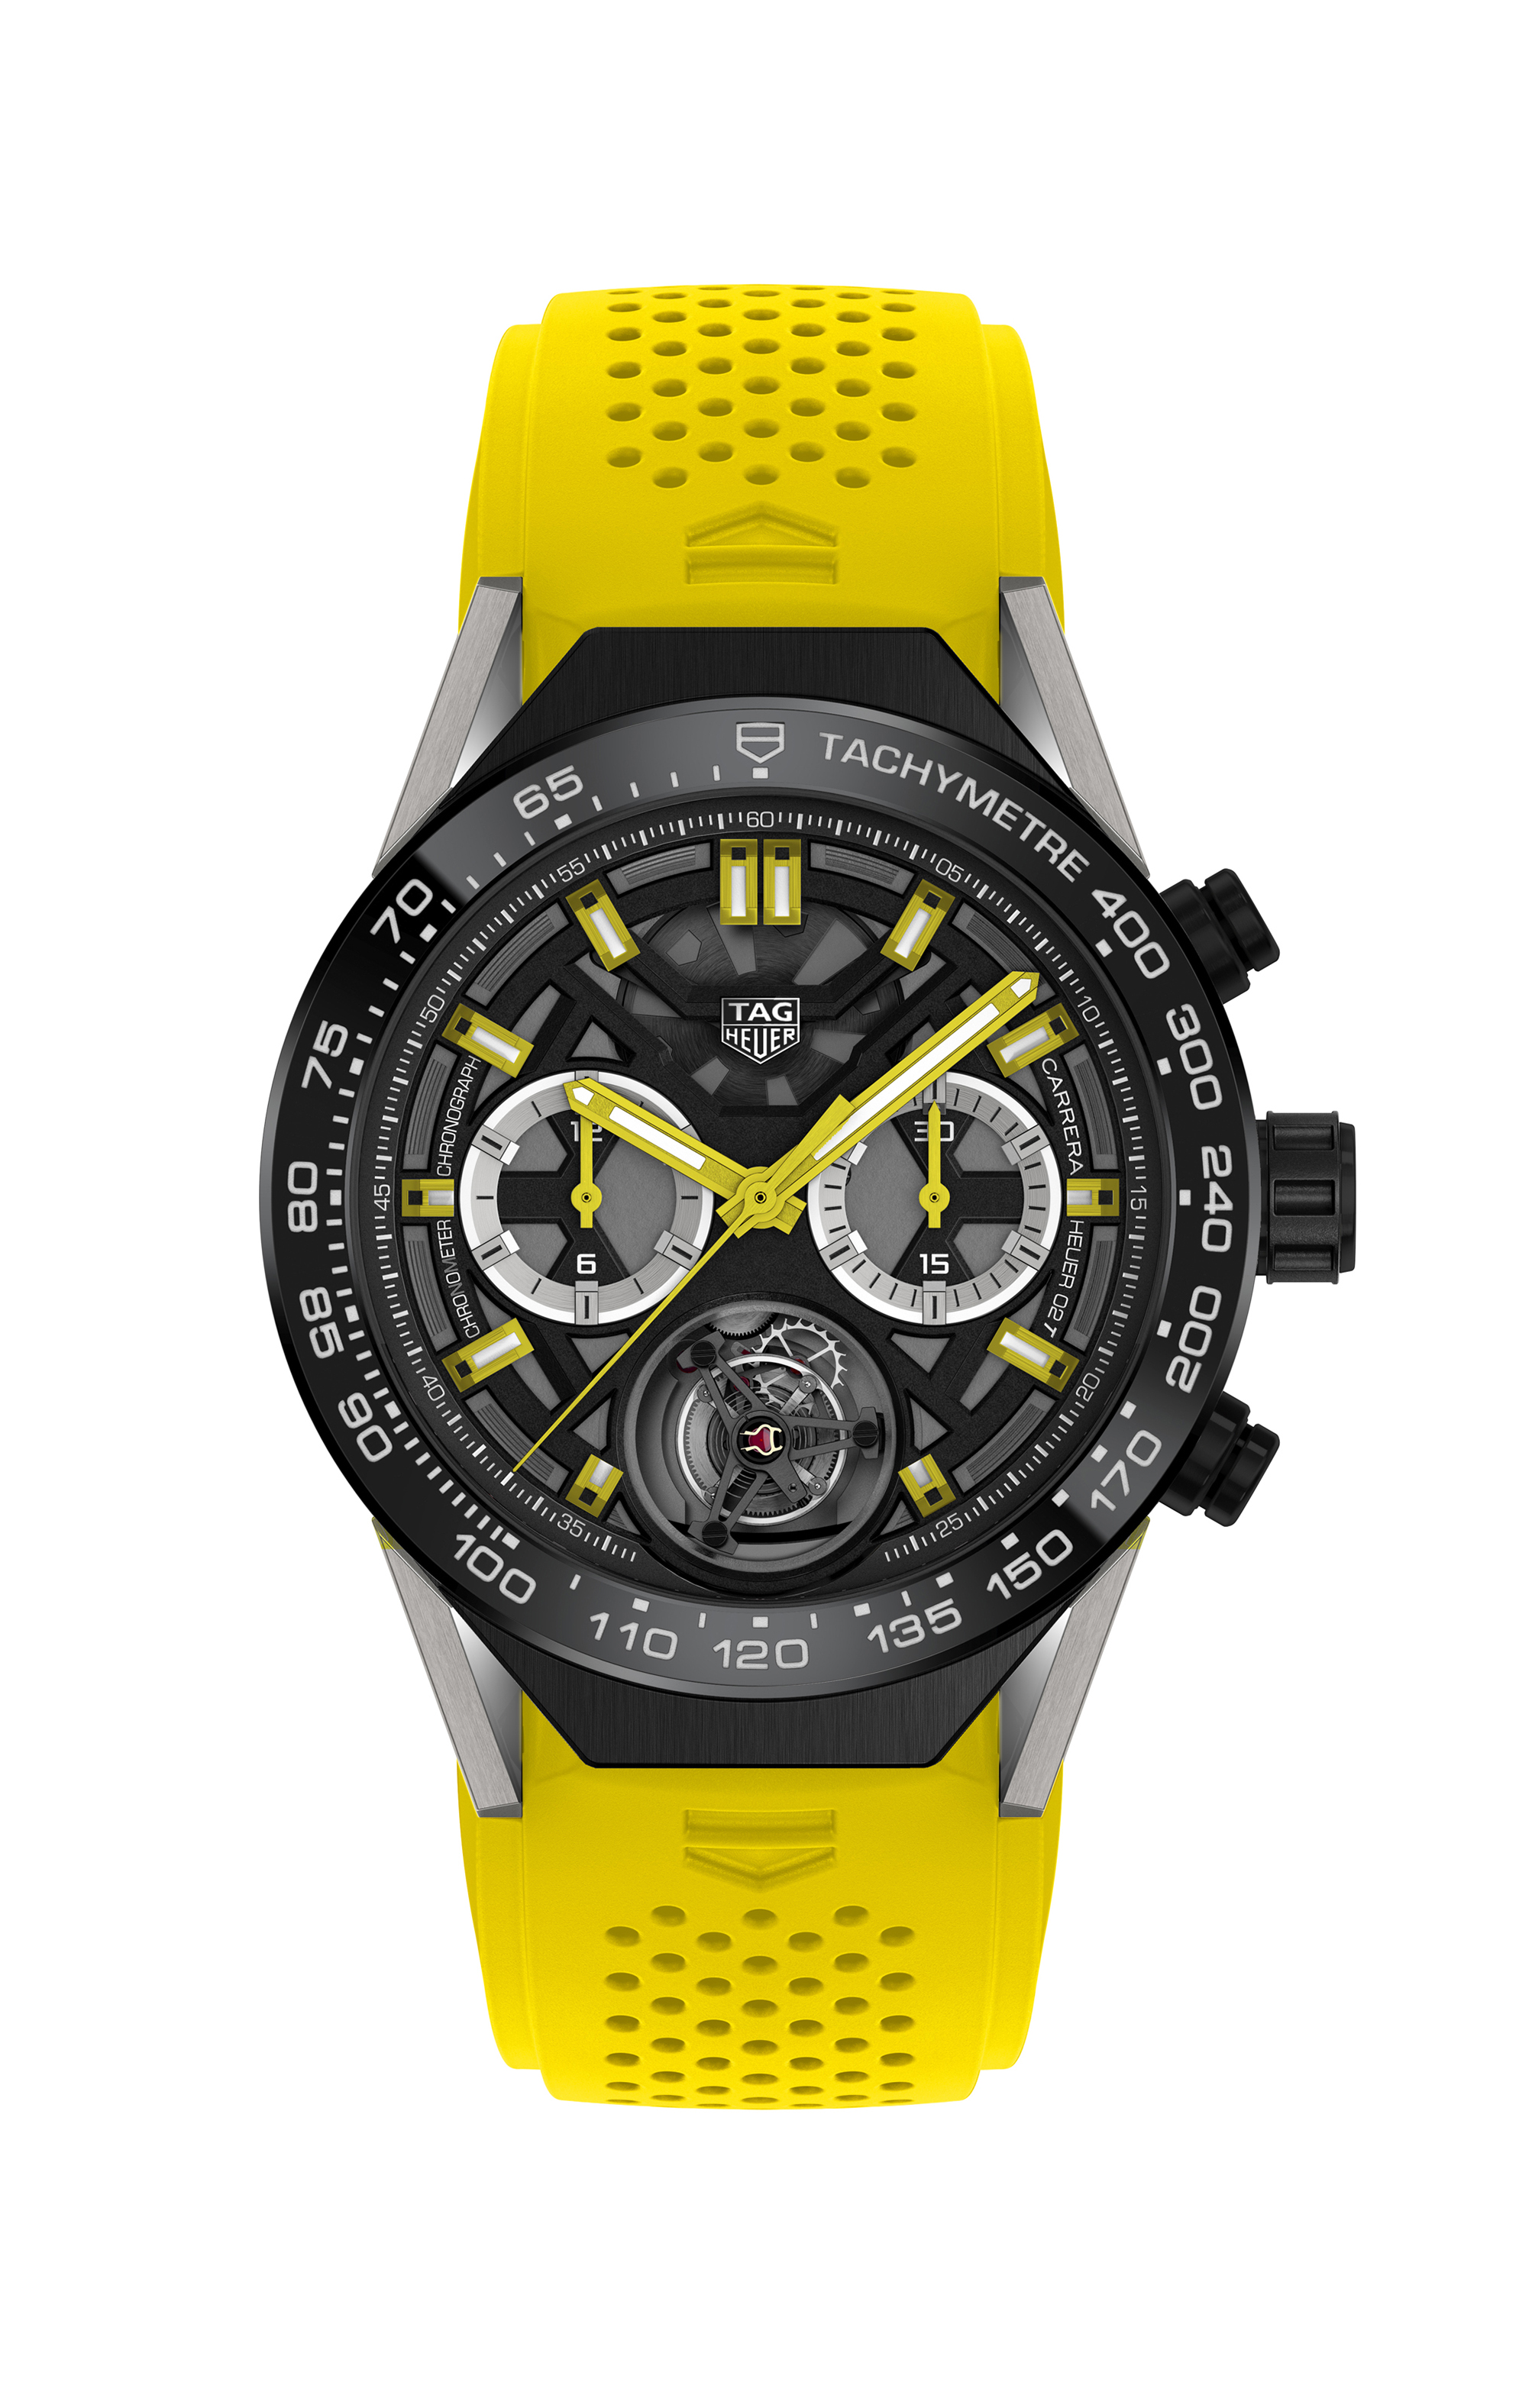 TAG HEUER TAG HEUER LUXURY KIT «ONLY WATCH» SPECIAL EDITION THE «ONLY WATCH KIT» FEATURES THE ONLY WATCH SIGNATURE COLOURS, BLACK AND VIBRANT YELLOW. IT CONTAINS THE CONNECTED MODULAR 45, THE FIRST